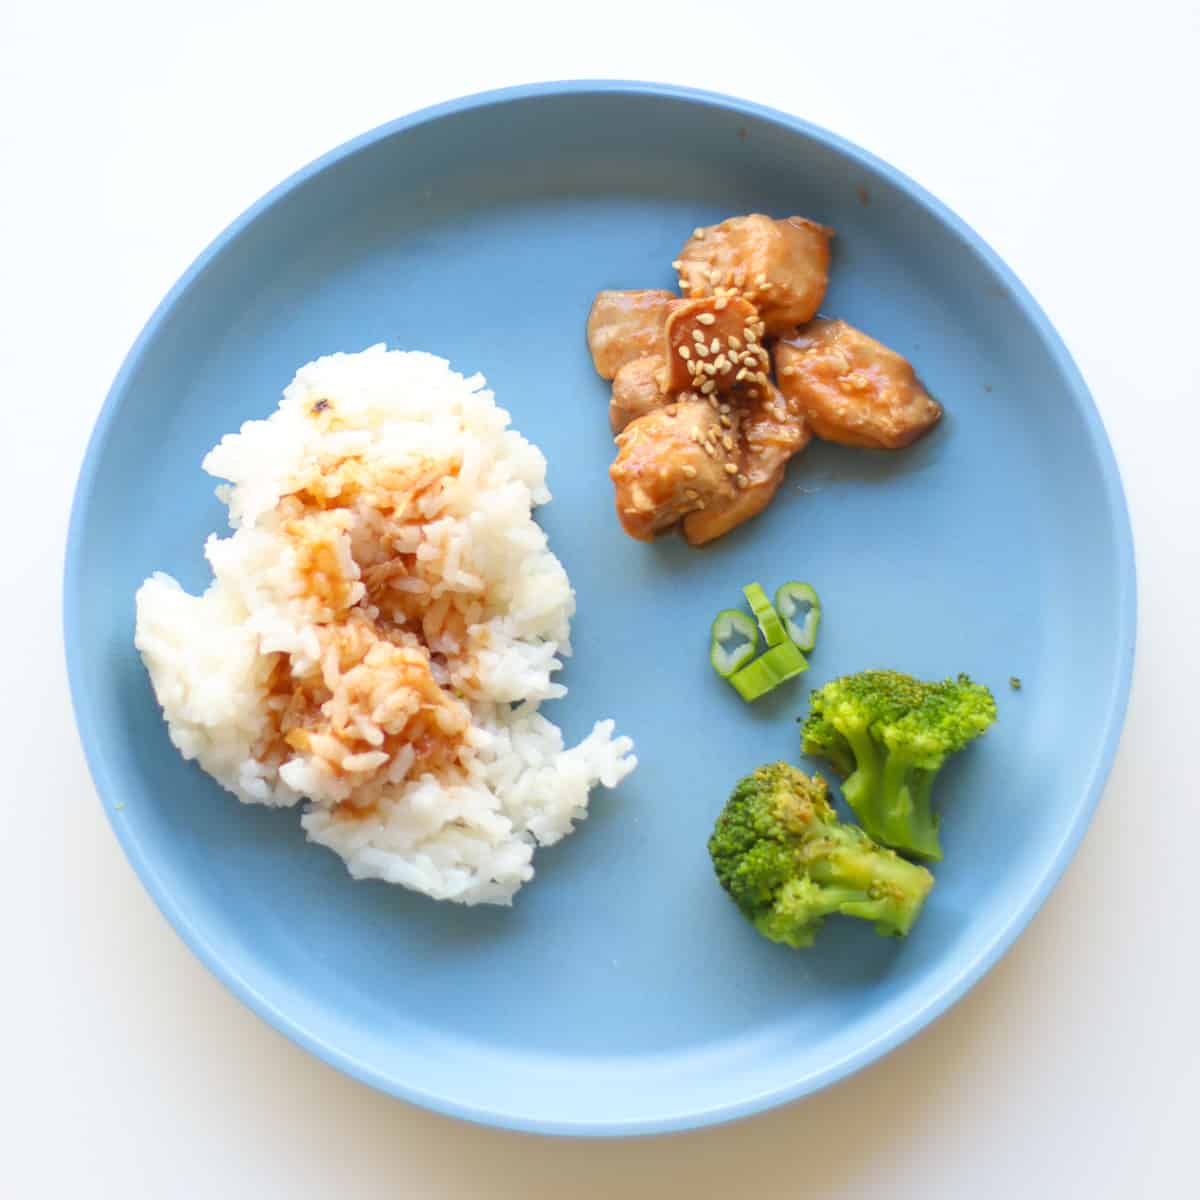 A deconstructed meal for a toddler on a blue plate.